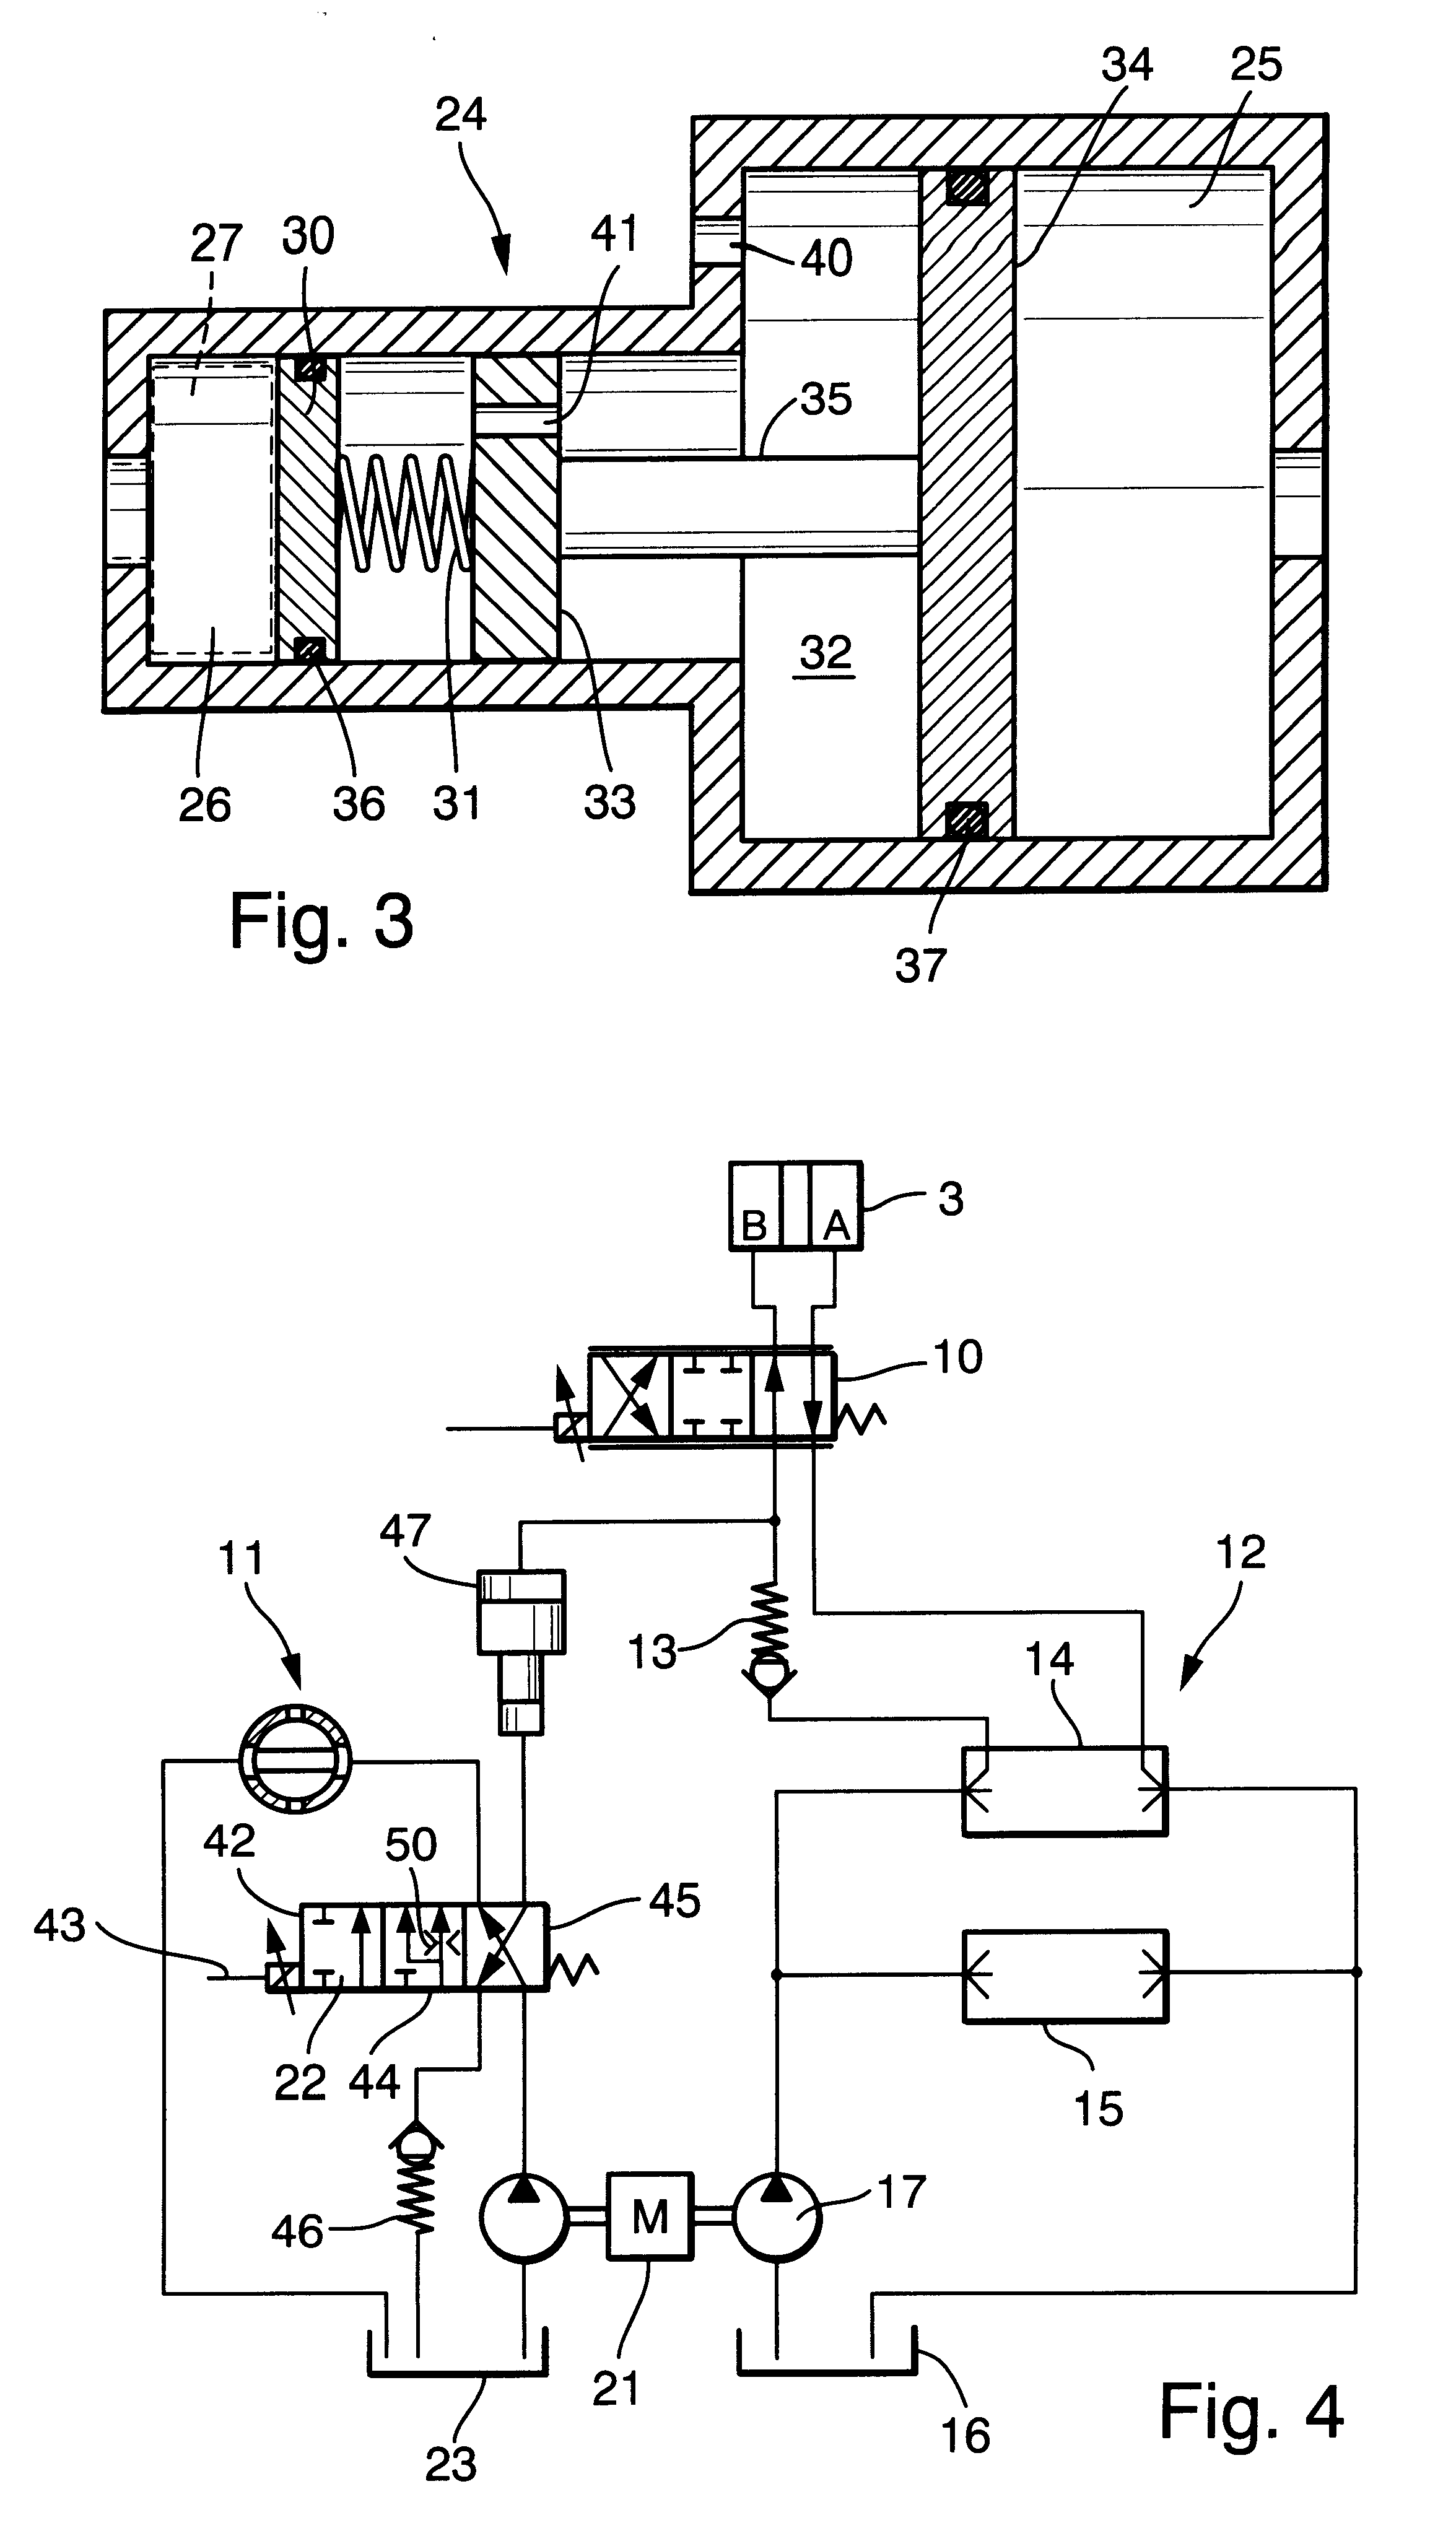 Apparatus for angular adjustment of camshafts relative to crankshafts in combustion engines